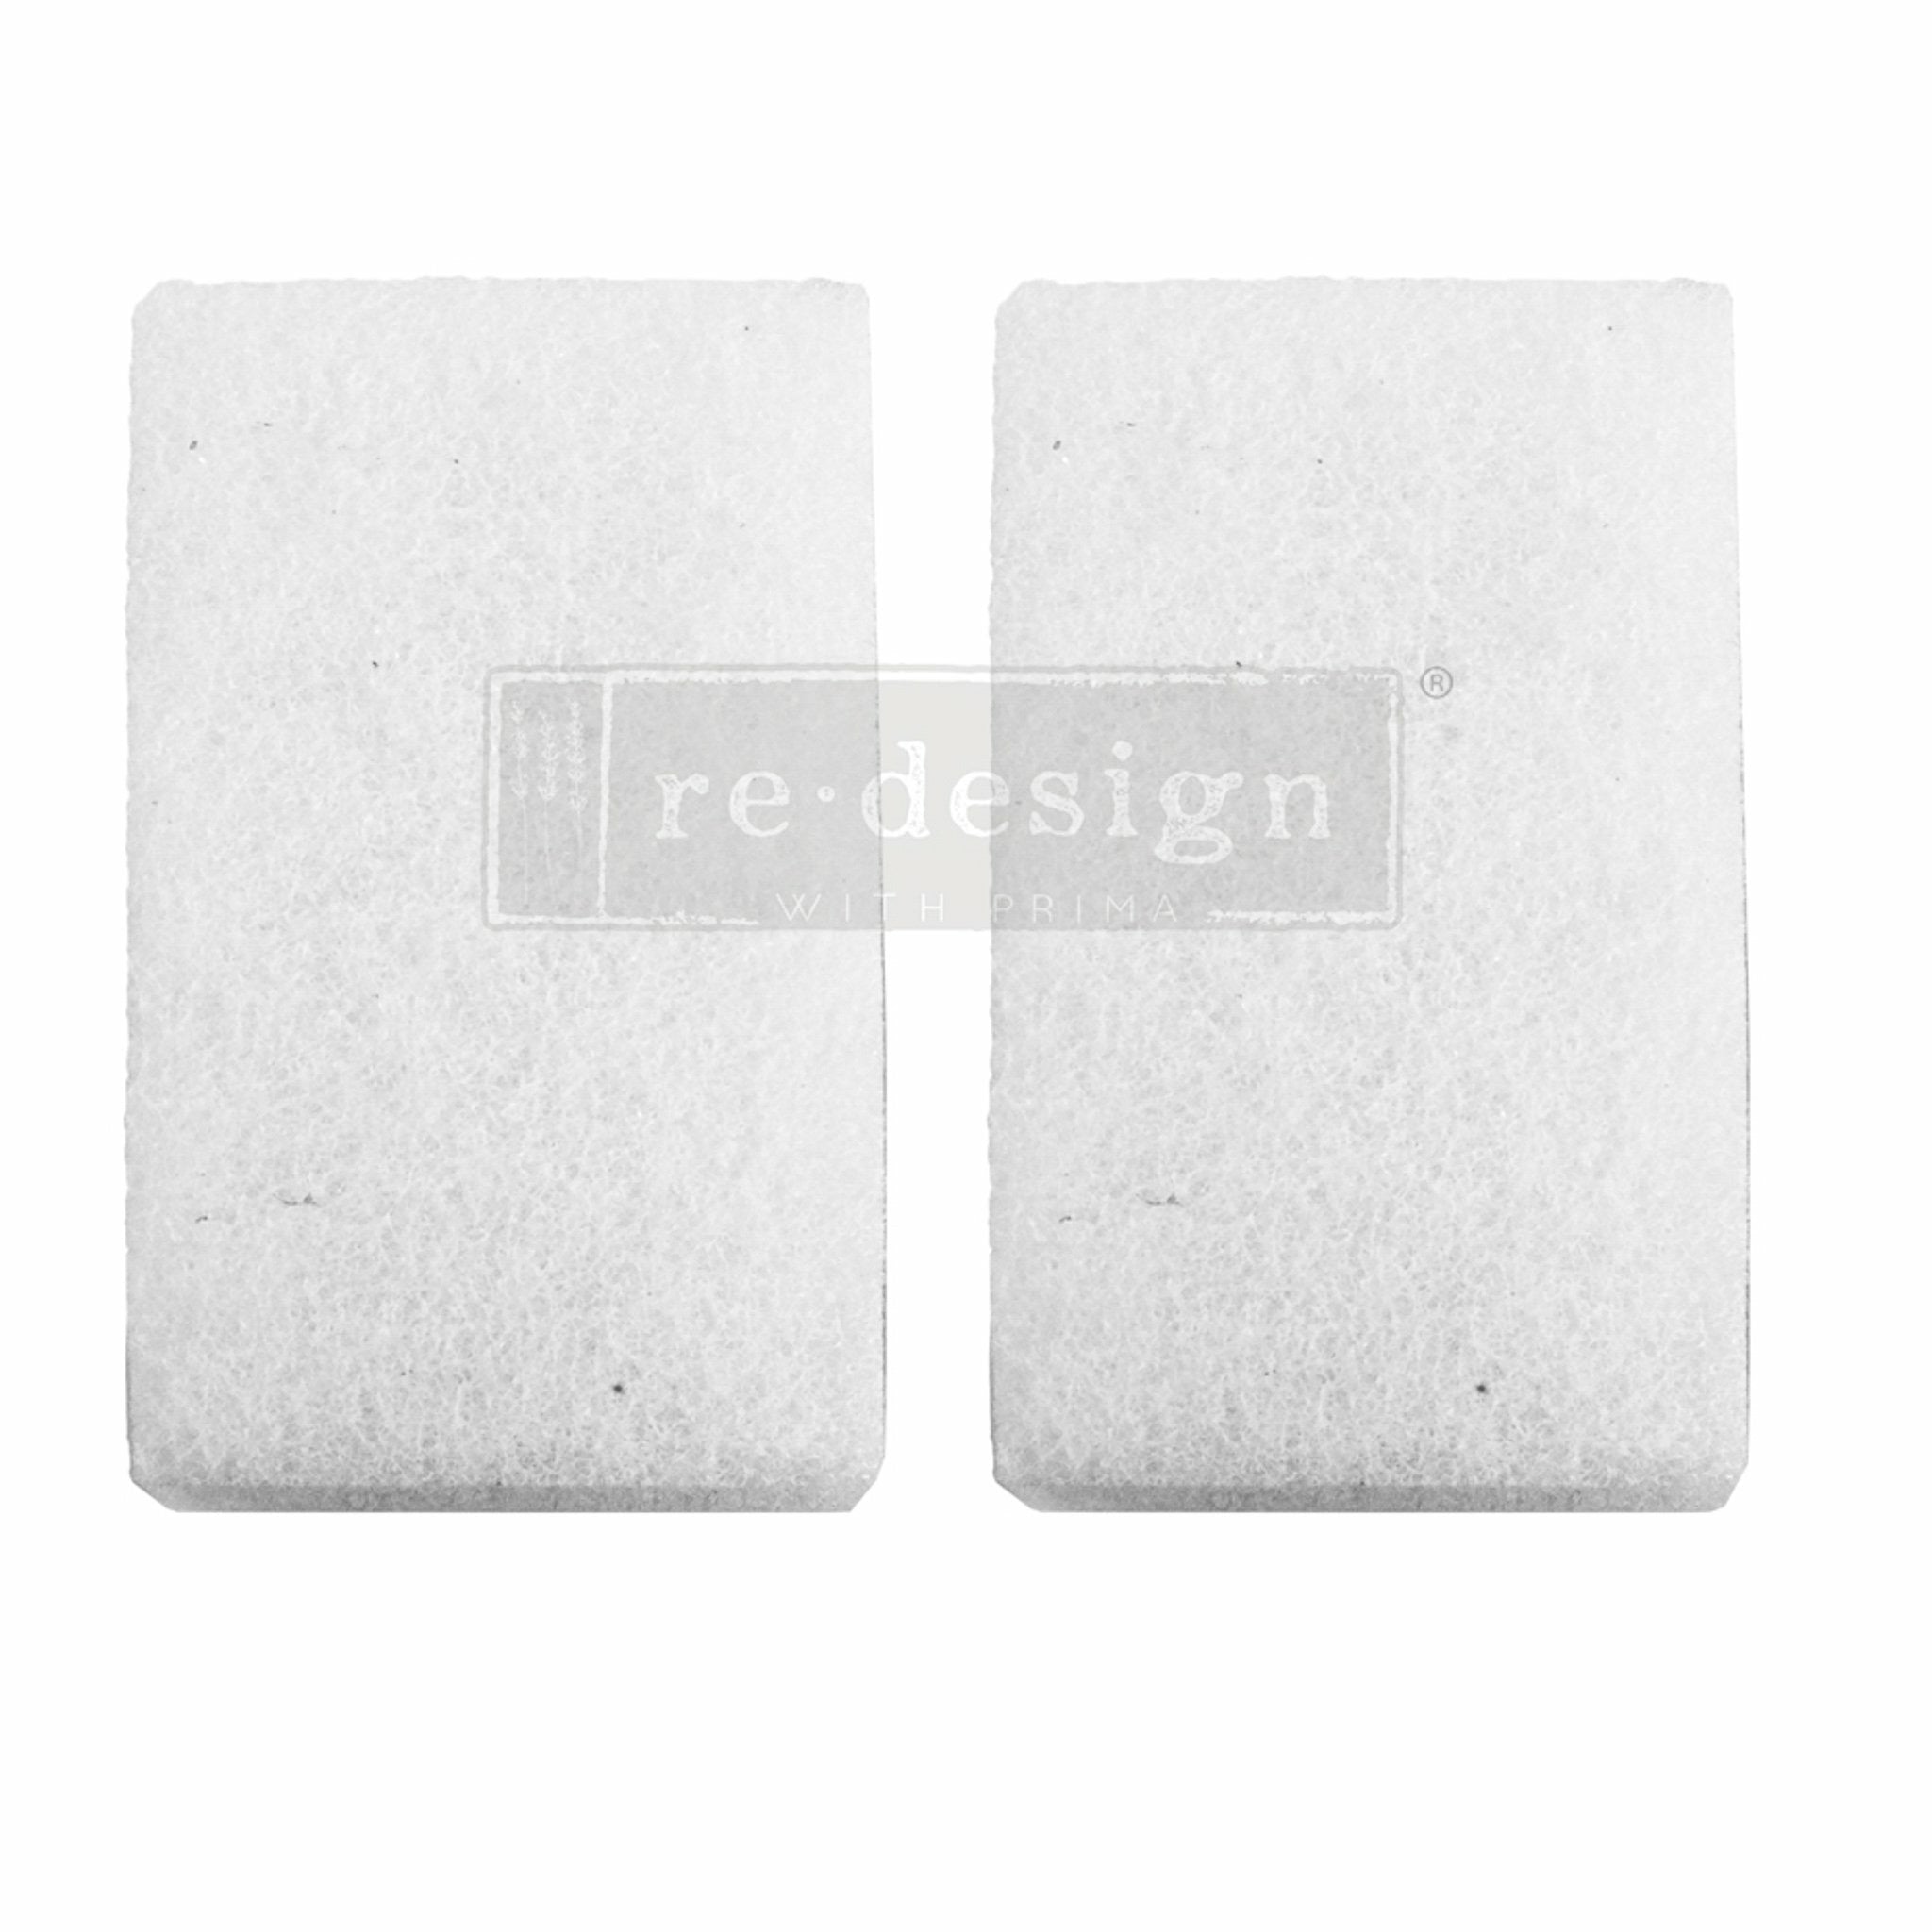 White background with two burnishing pads and a transparent redesign logo on top.